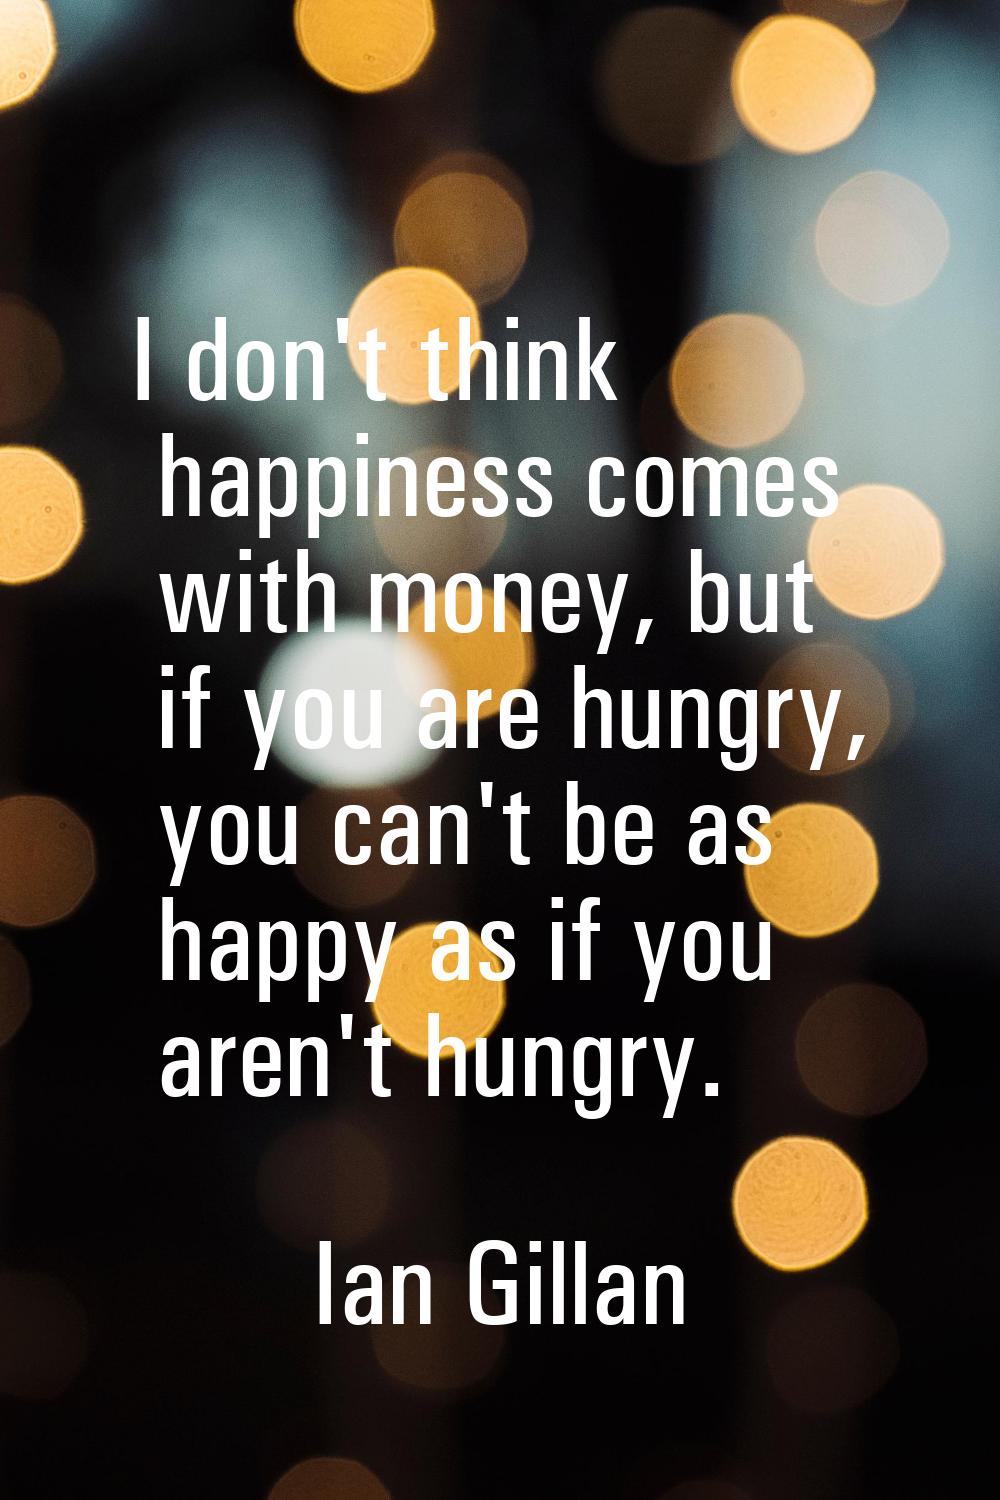 I don't think happiness comes with money, but if you are hungry, you can't be as happy as if you ar